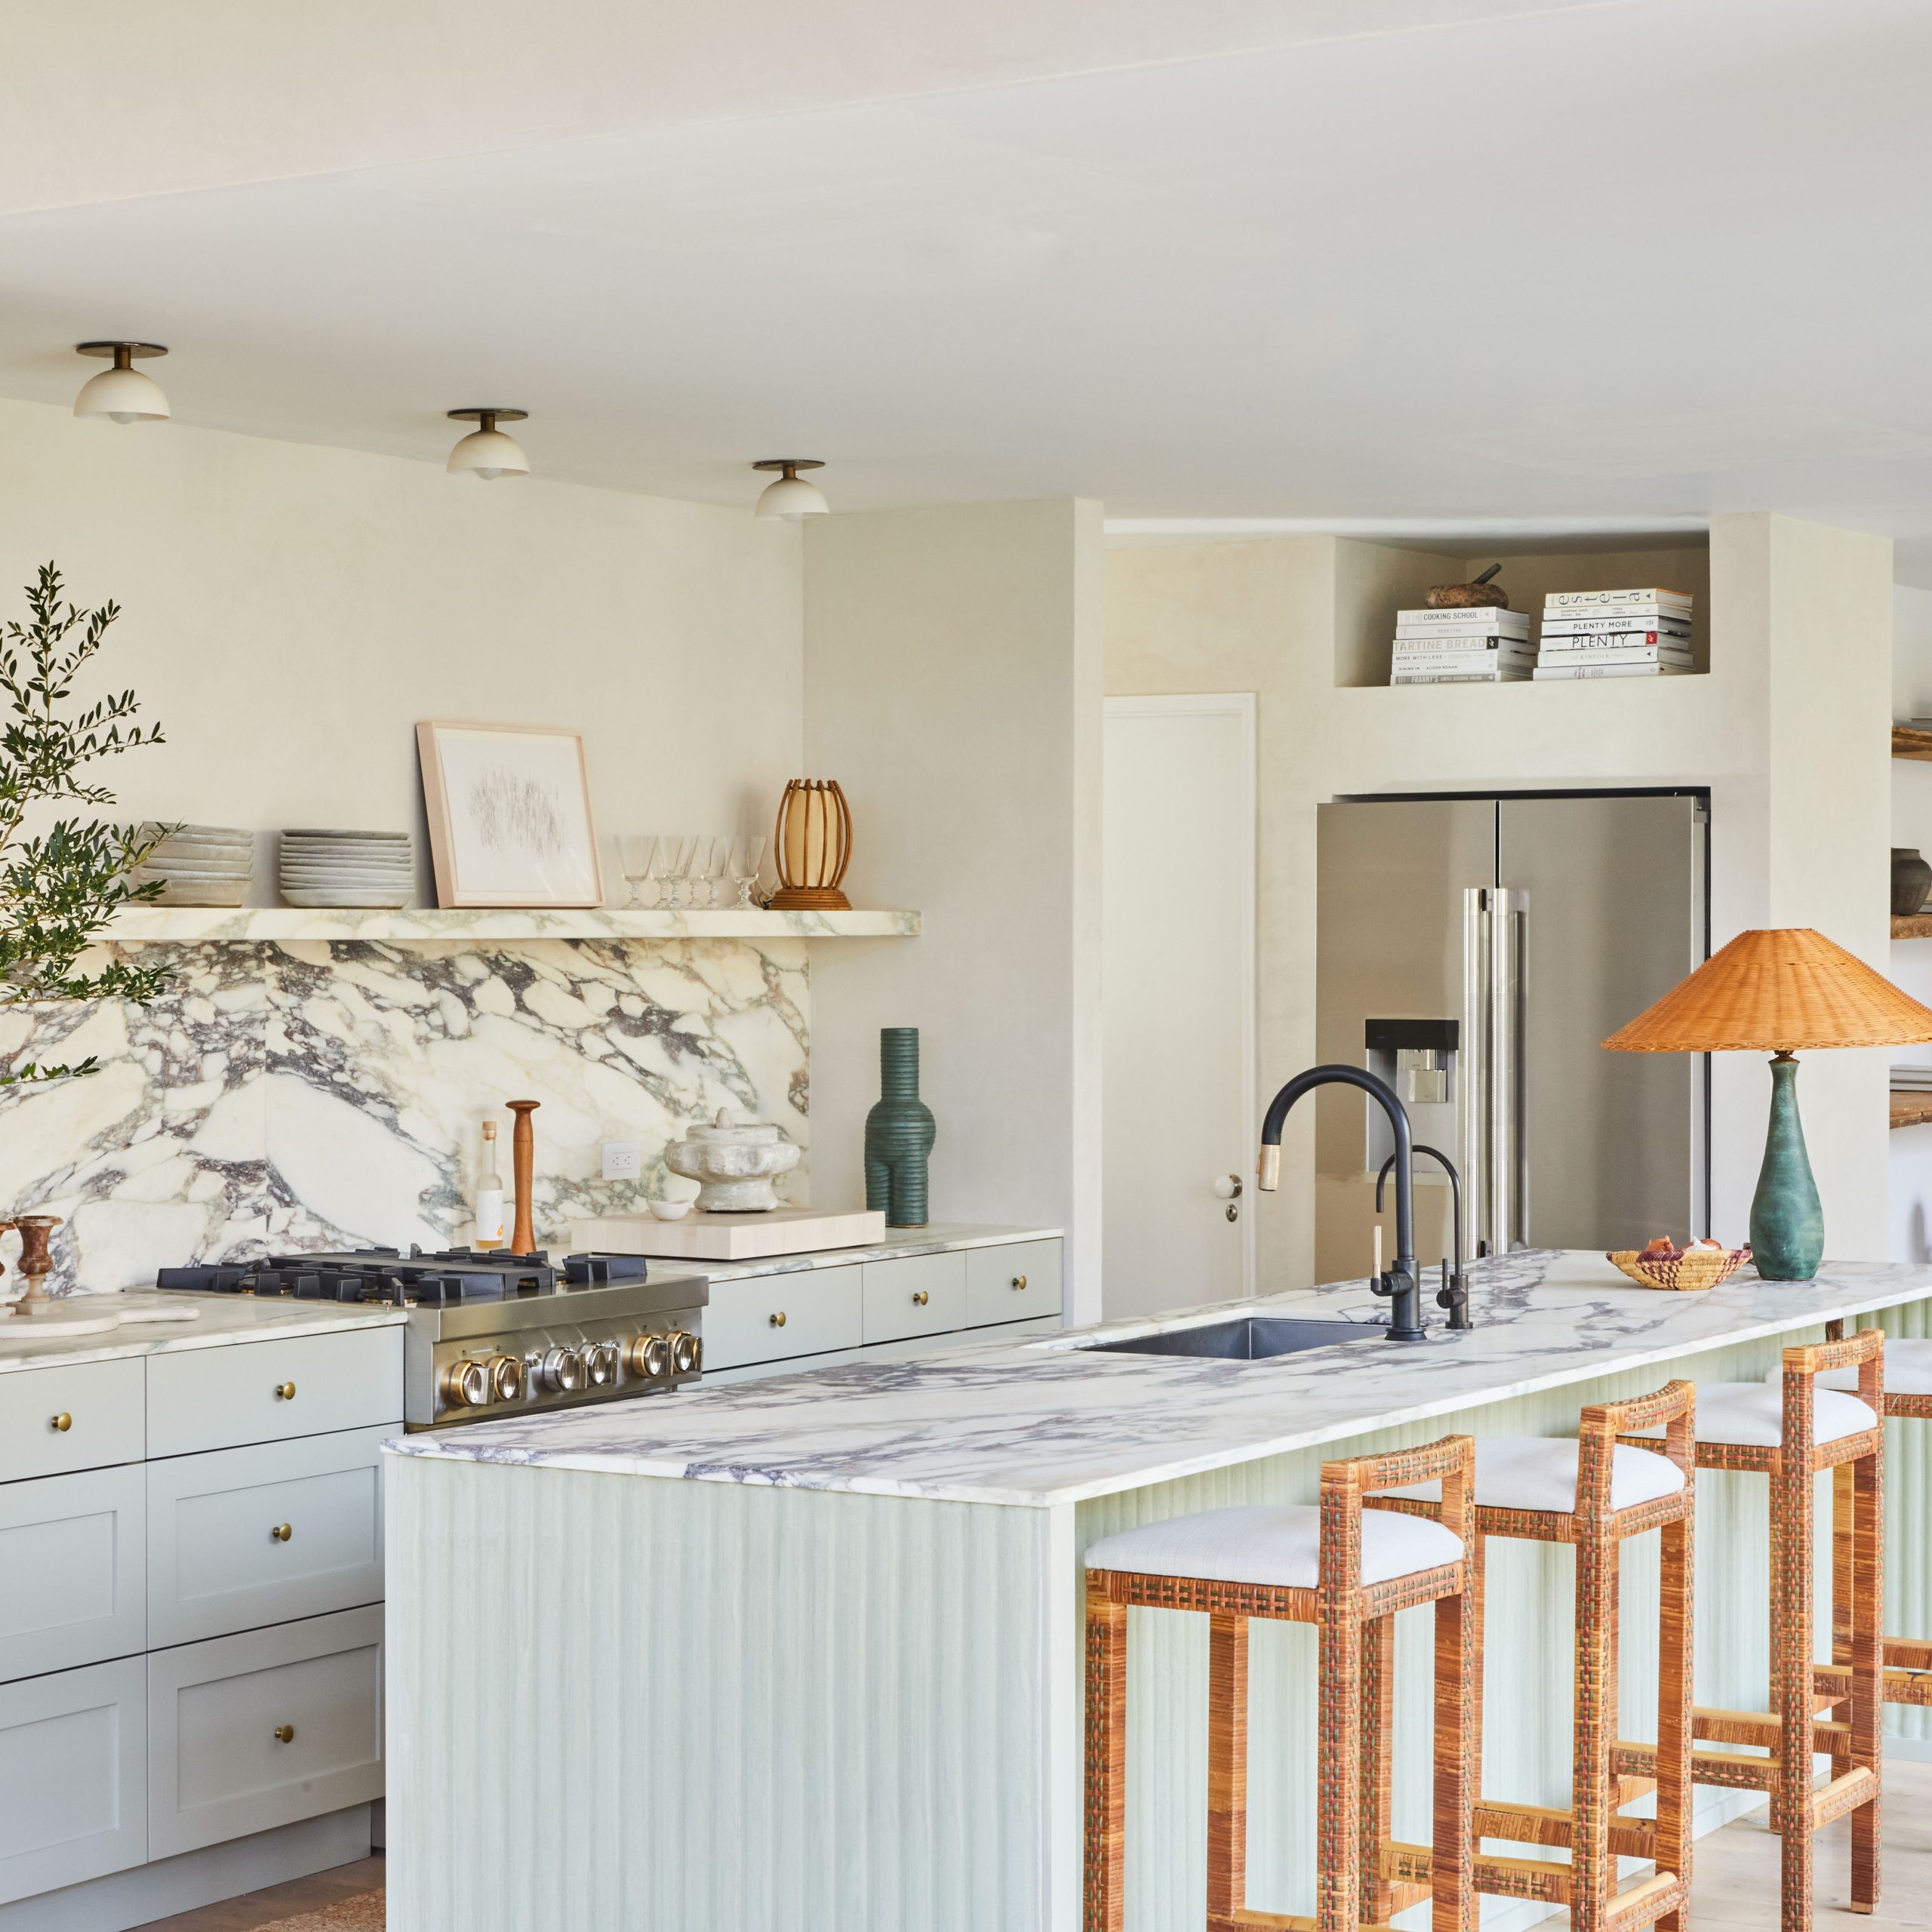 The Best Kitchen Islands for Every Home: Find the perfect kitchen island for your home with this comprehensive guide.